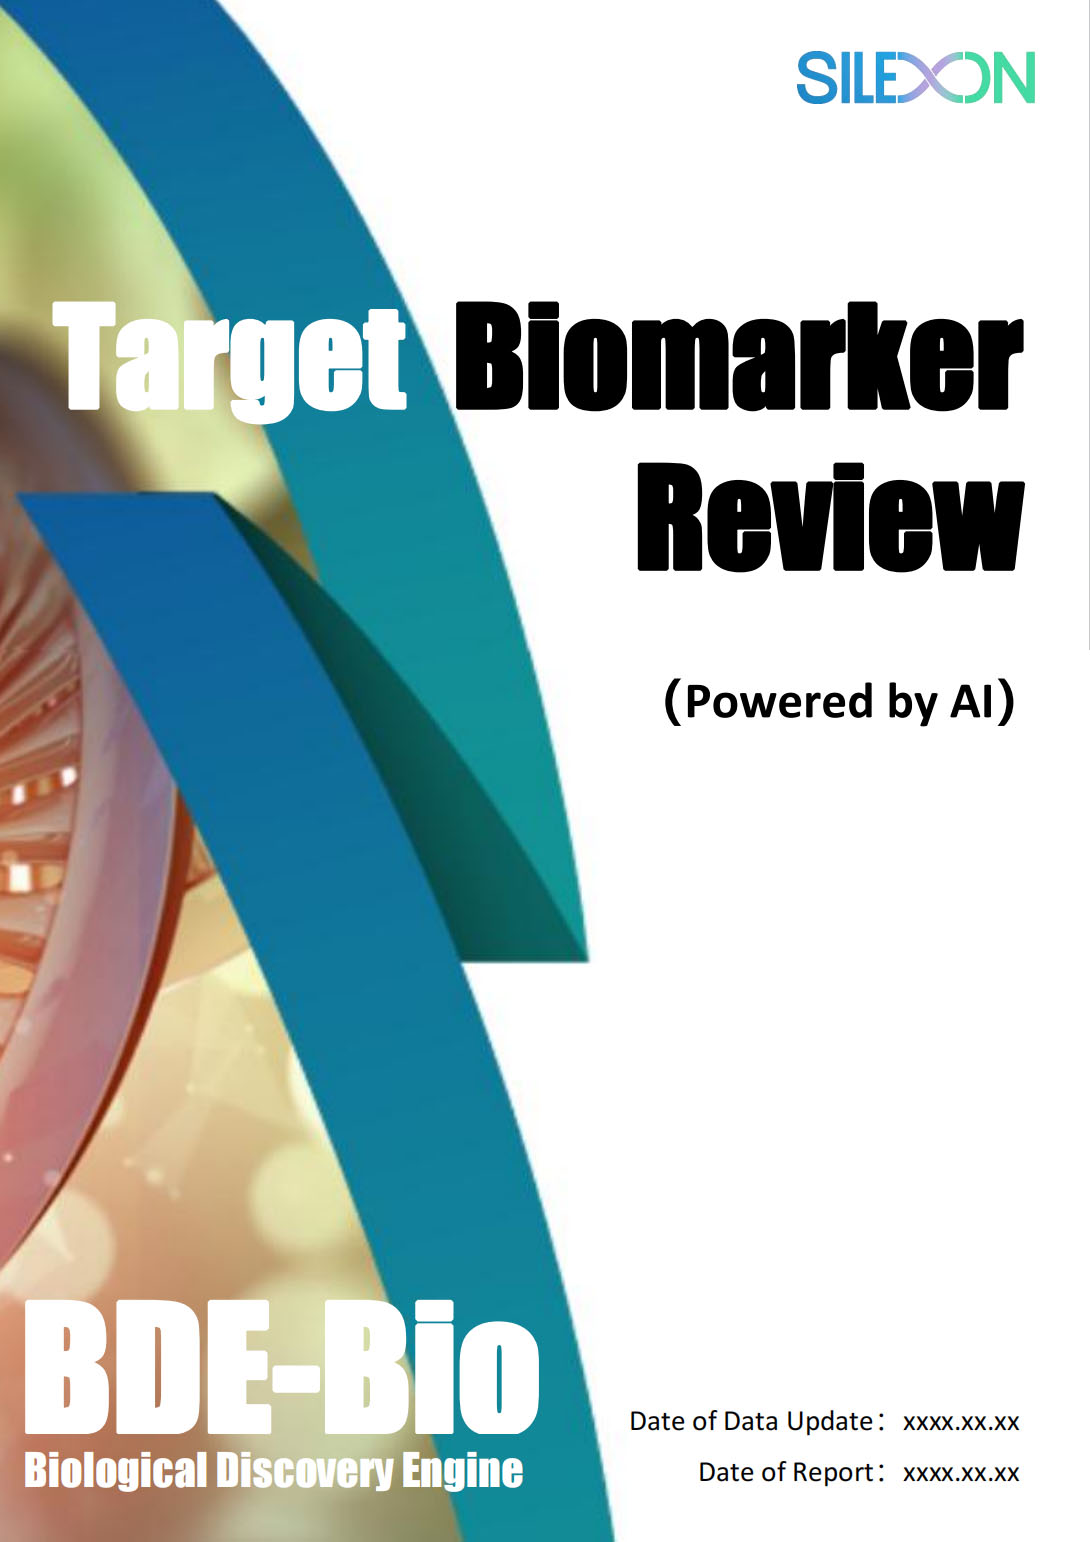 Review Report on HDHD5-AS1 Target / Biomarker